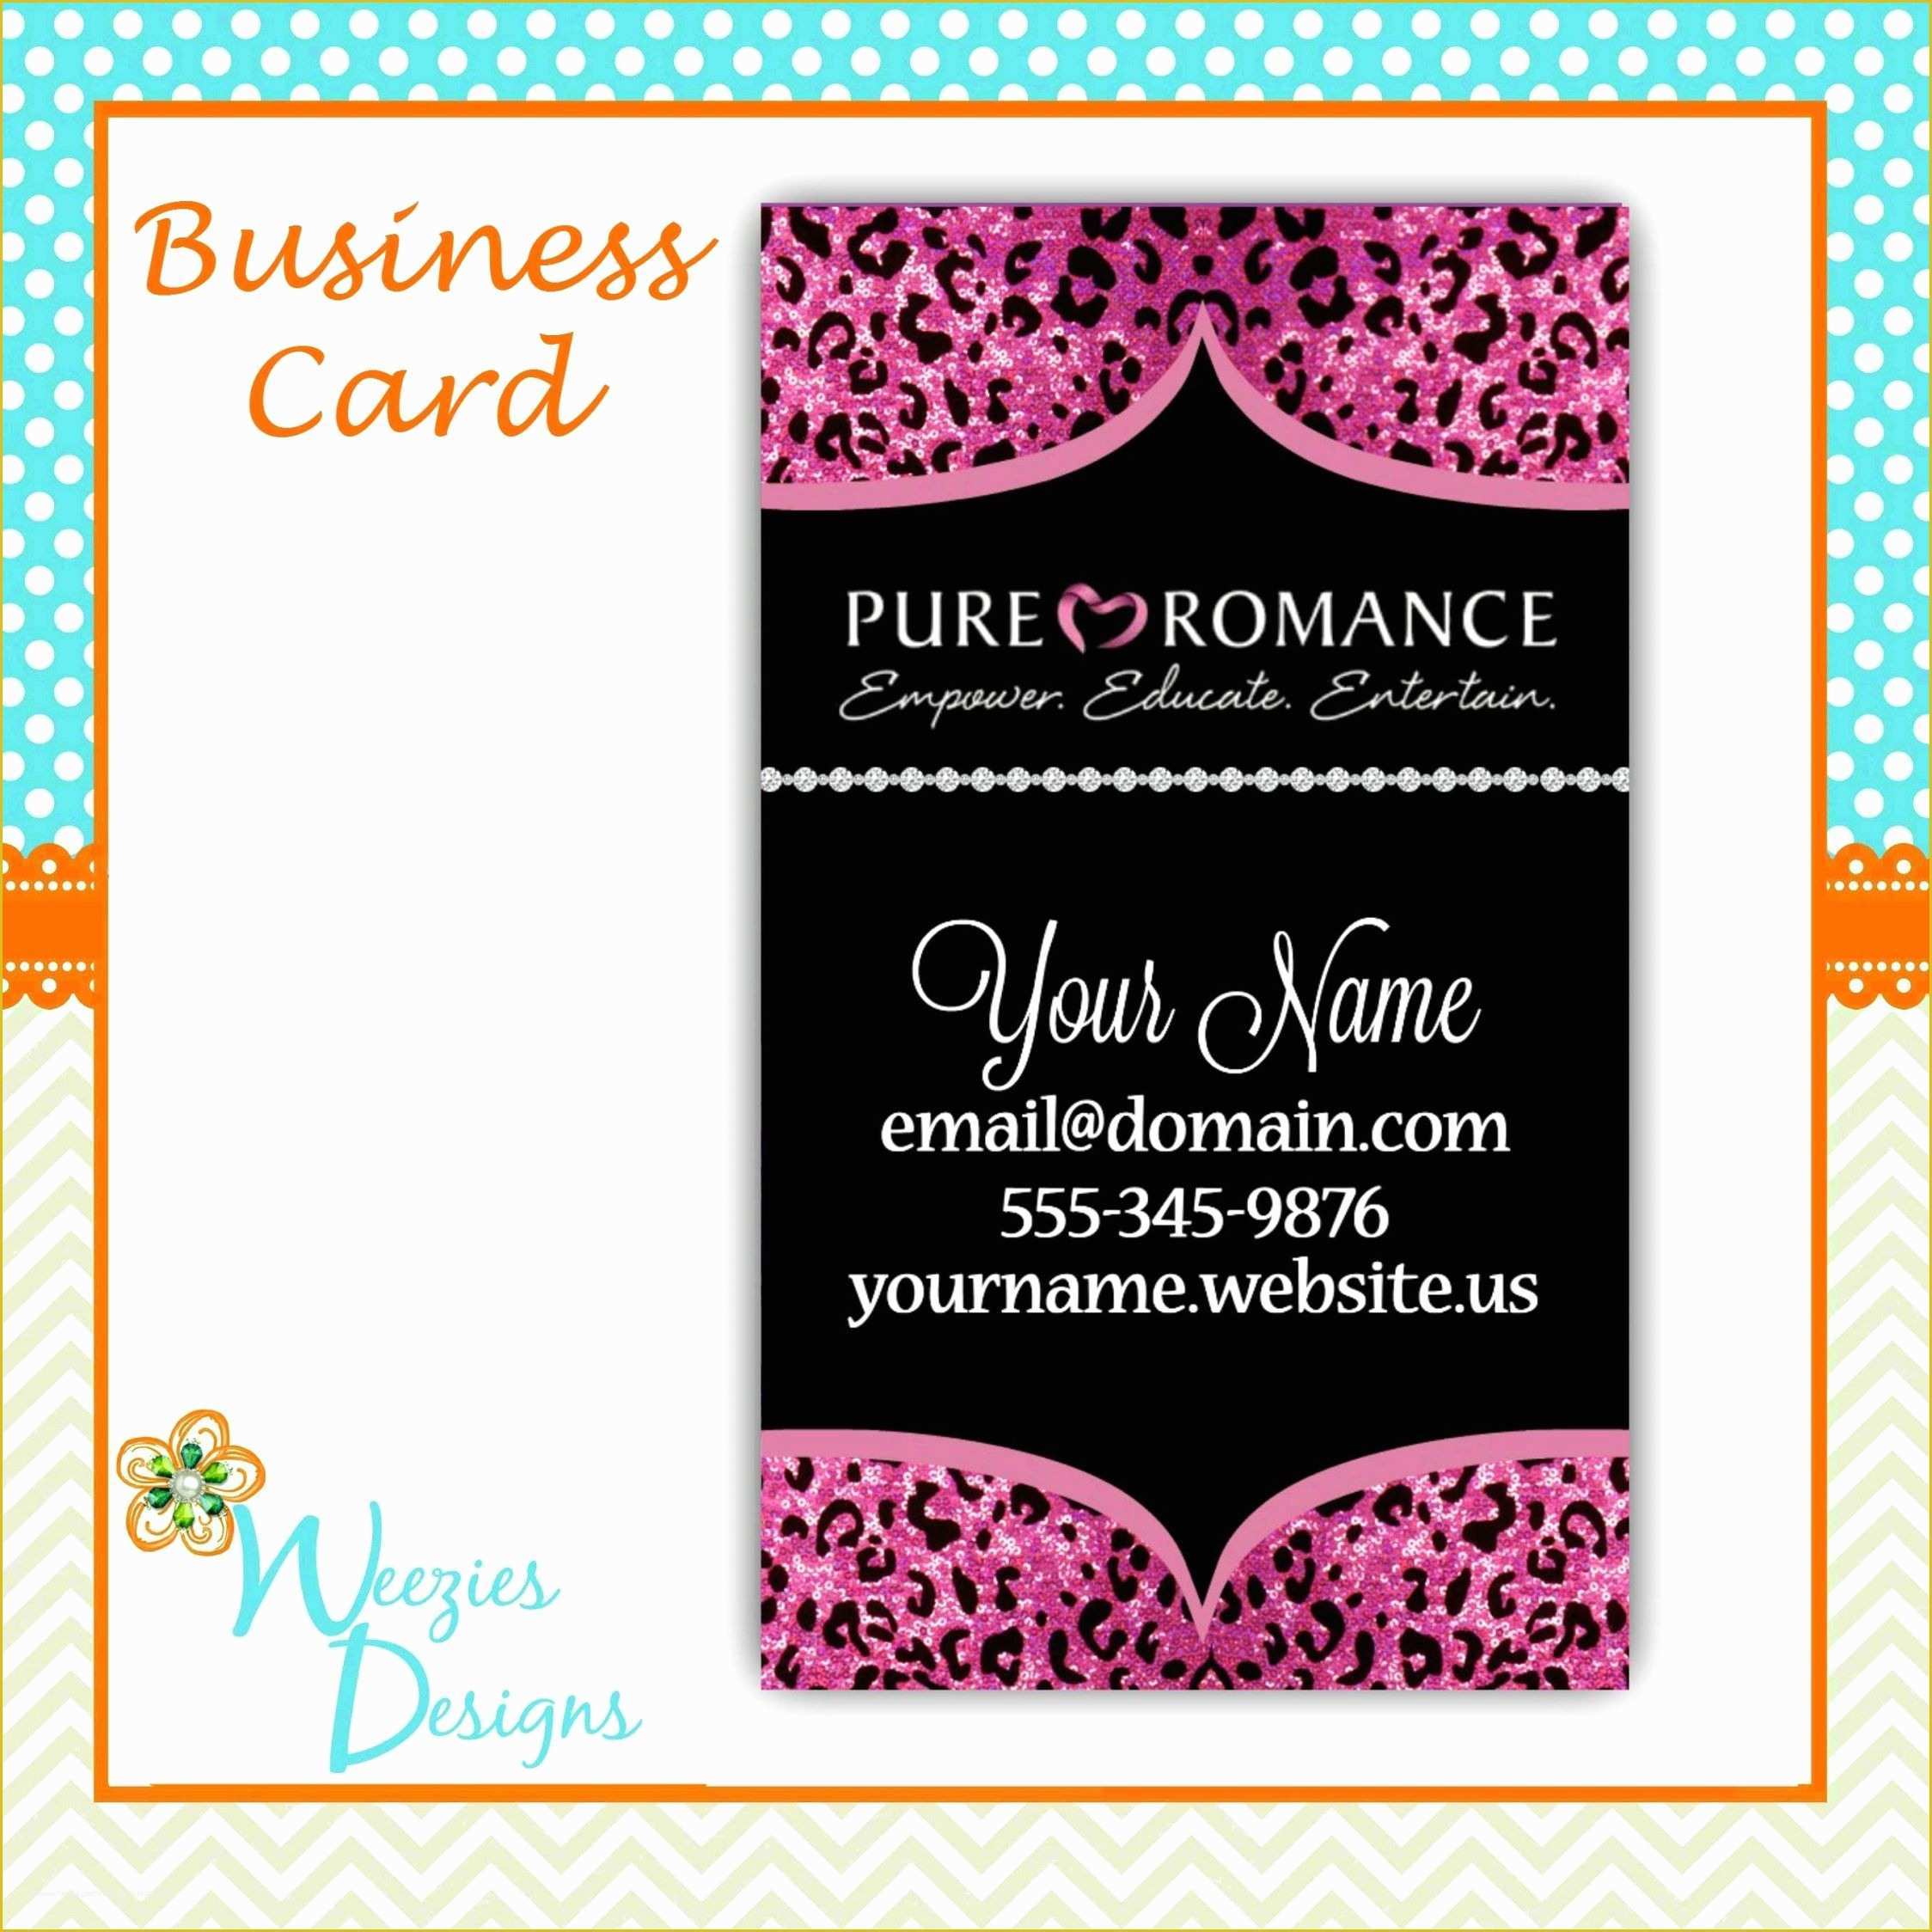 Business Card Template for Free Printable Of Doterra Business Card Template Printable Free Printable